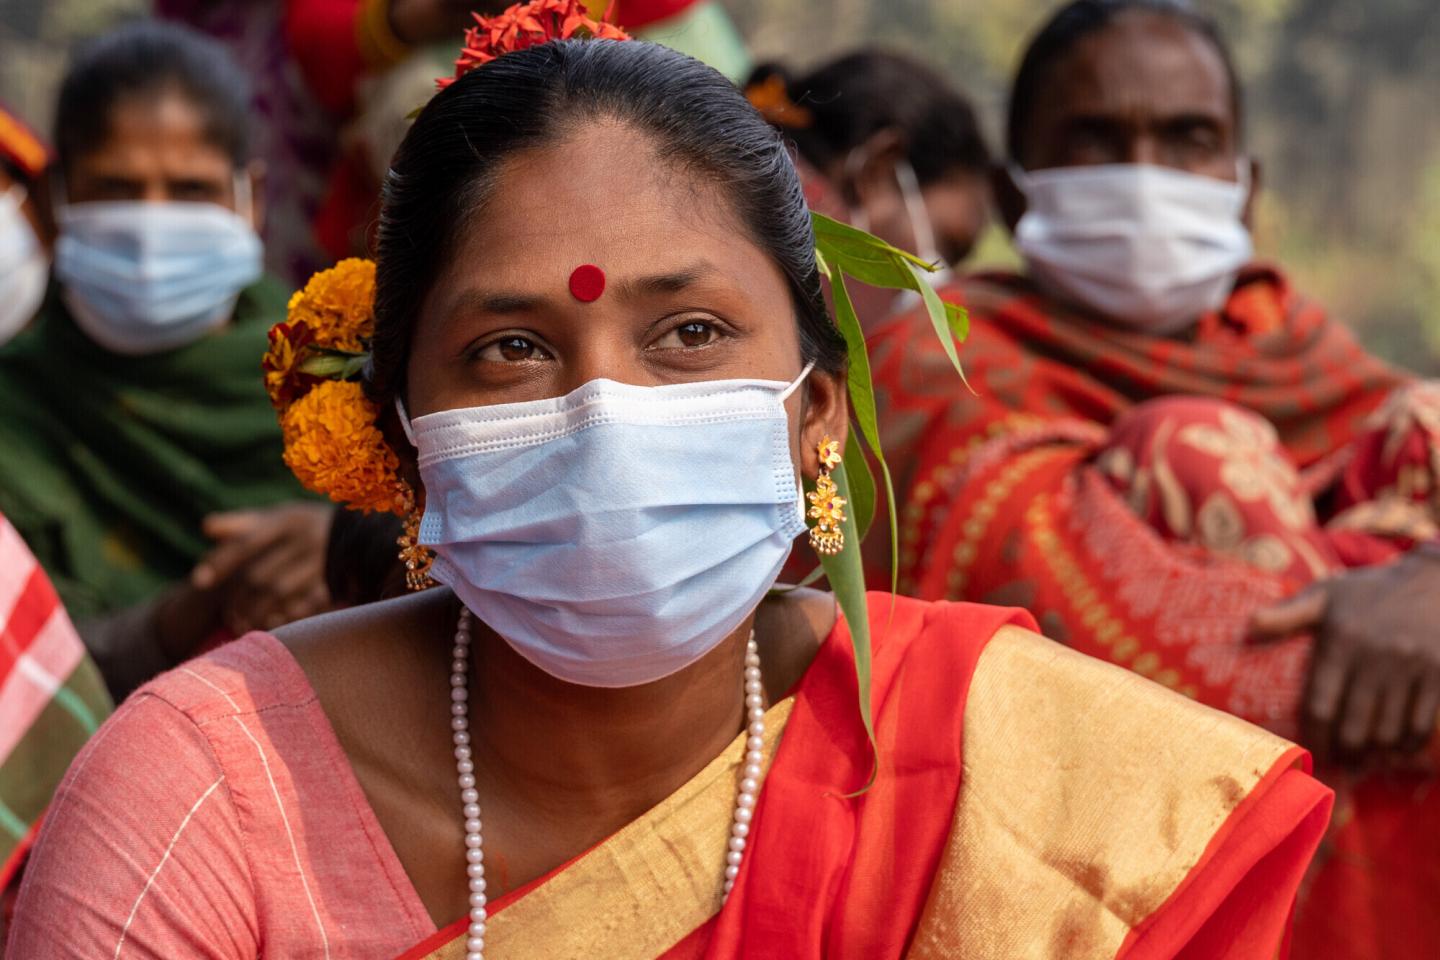 A Bangladeshi woman with flowers in her, wearing a face mask and a red bindi 